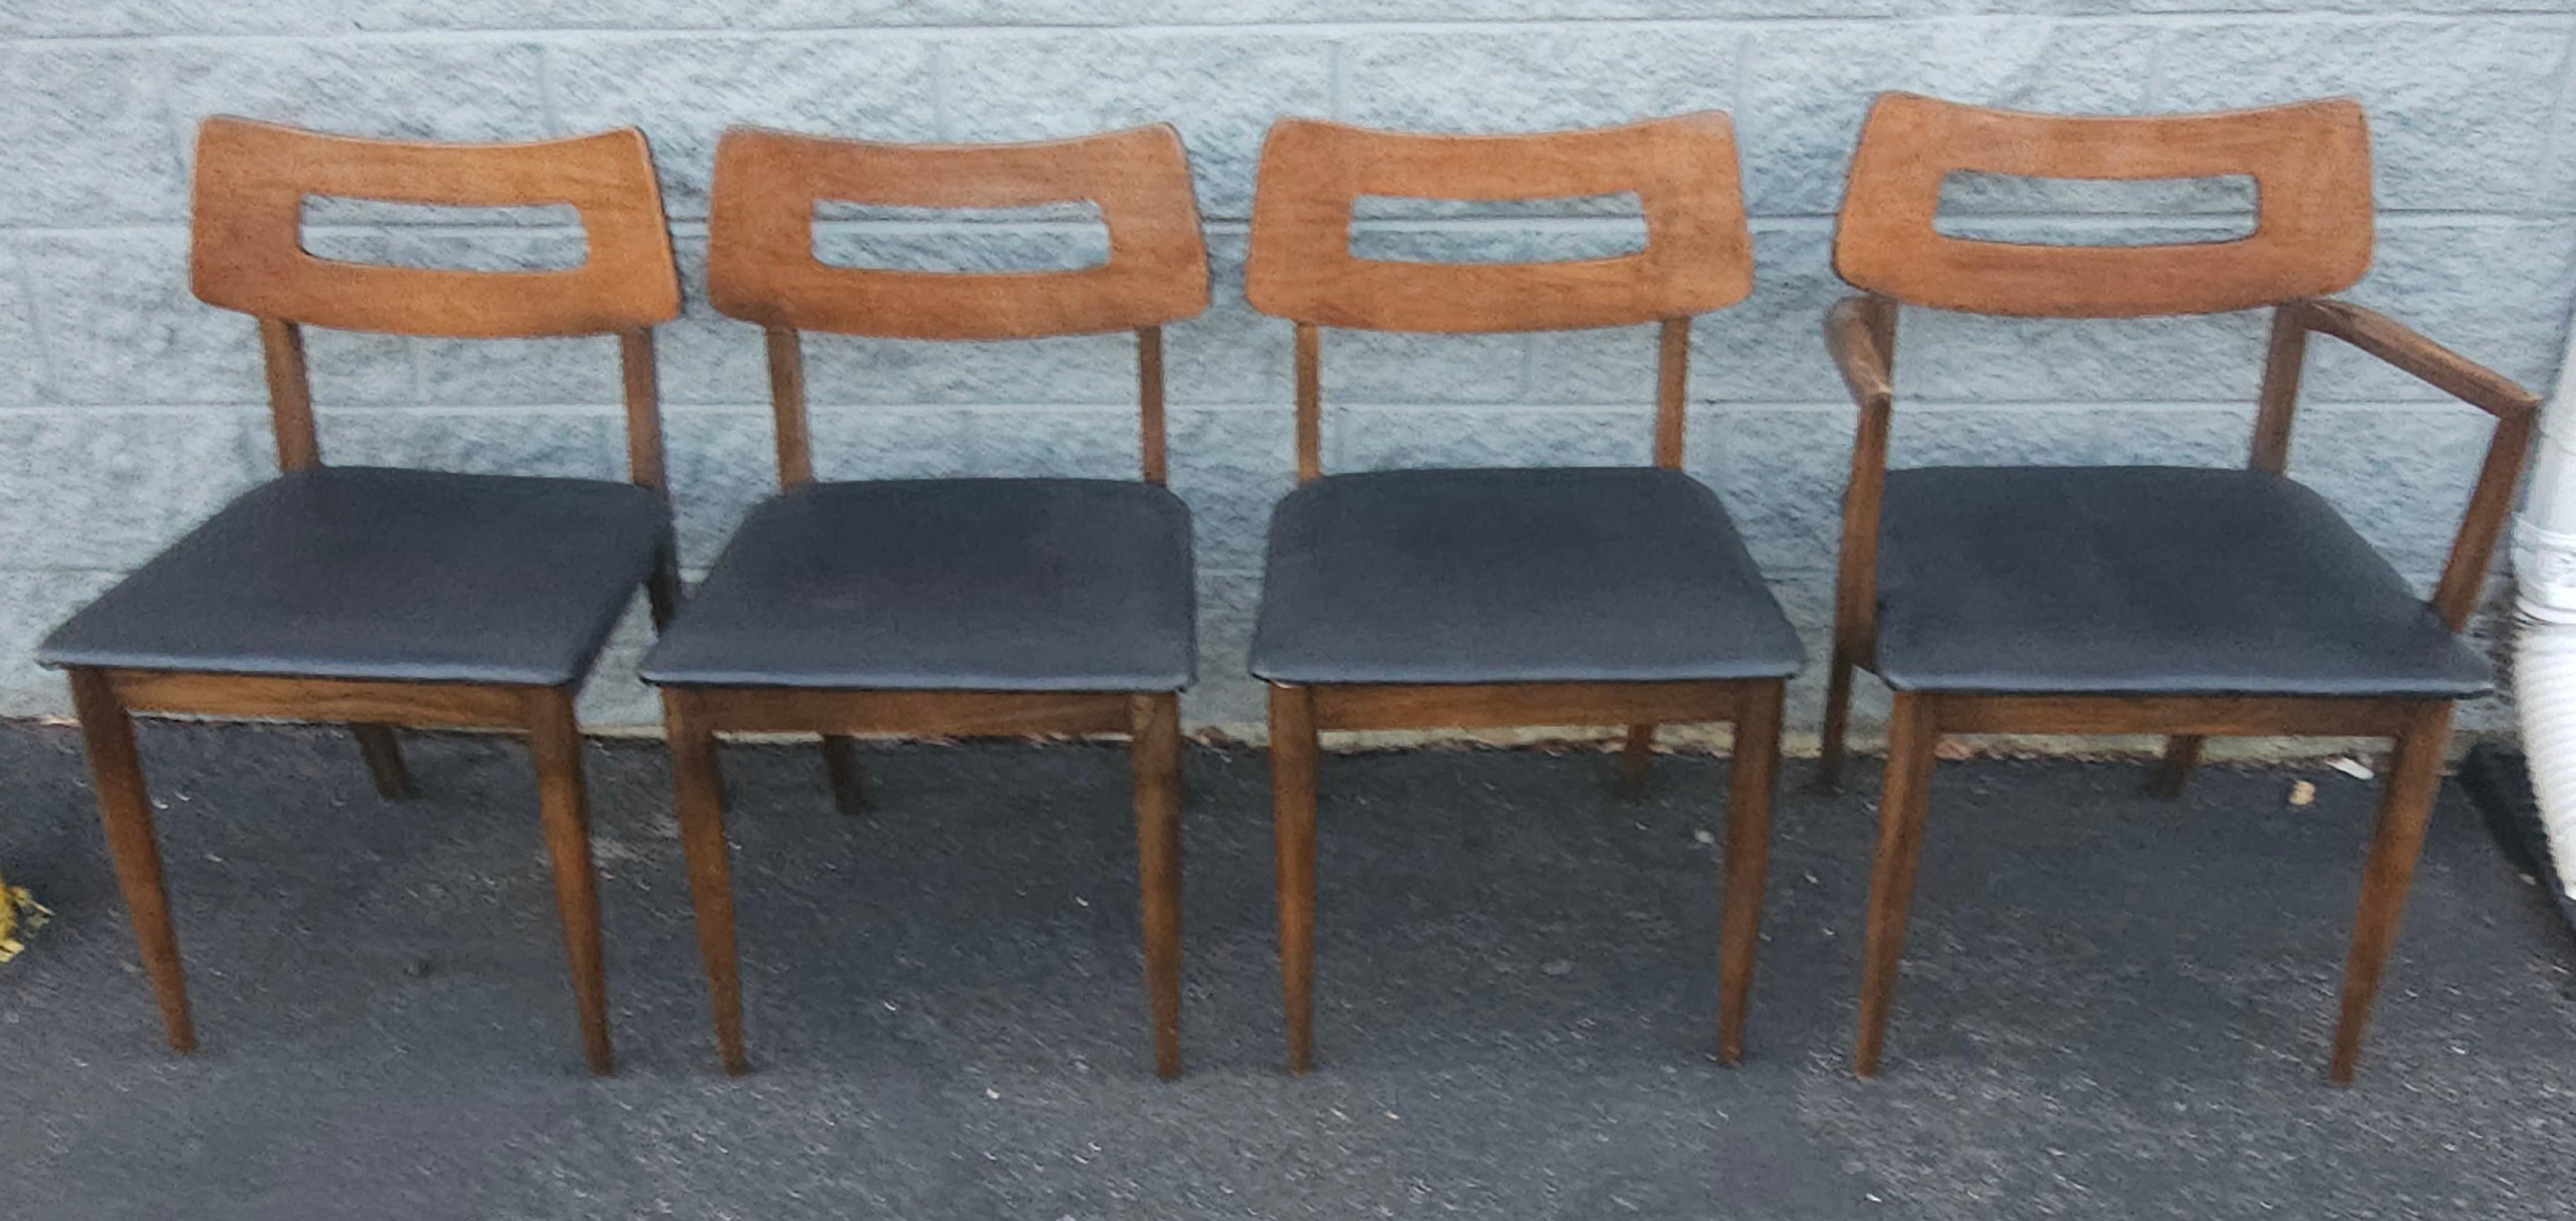 Set of 4 Mid Century Walnut and Vinyl Seat Upholstered Chairs For Sale 2